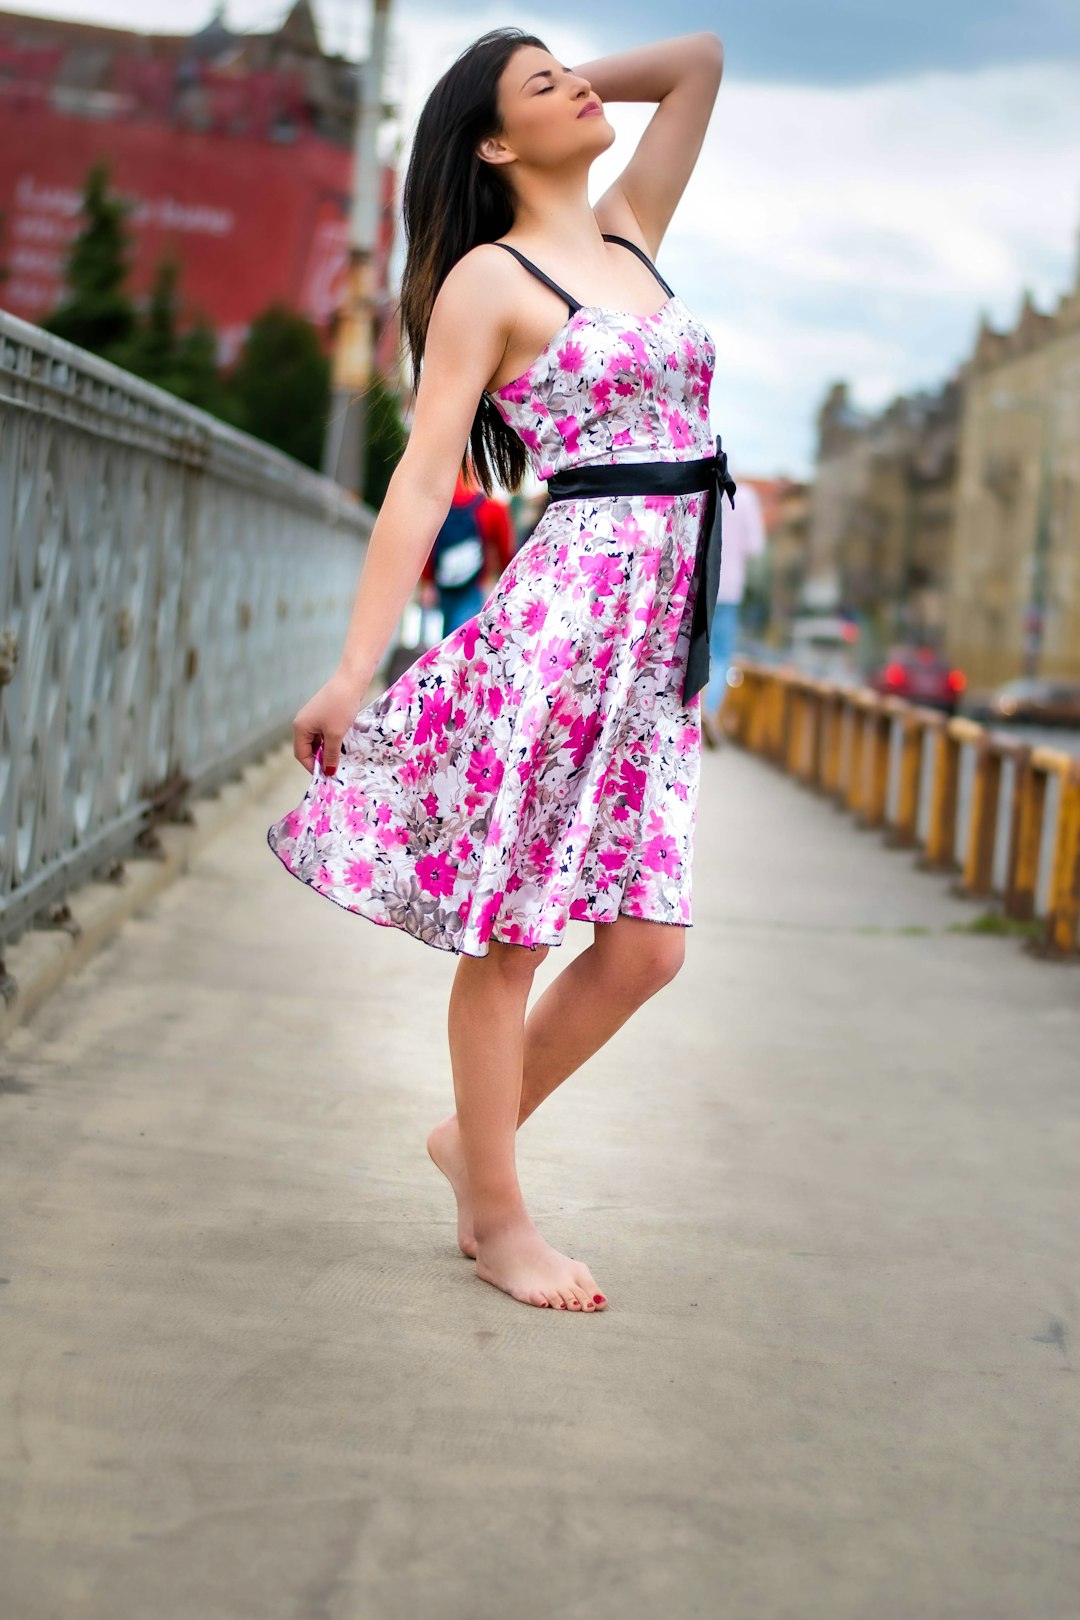 woman in pink and white floral spaghetti strap dress walking on gray concrete bridge during daytime